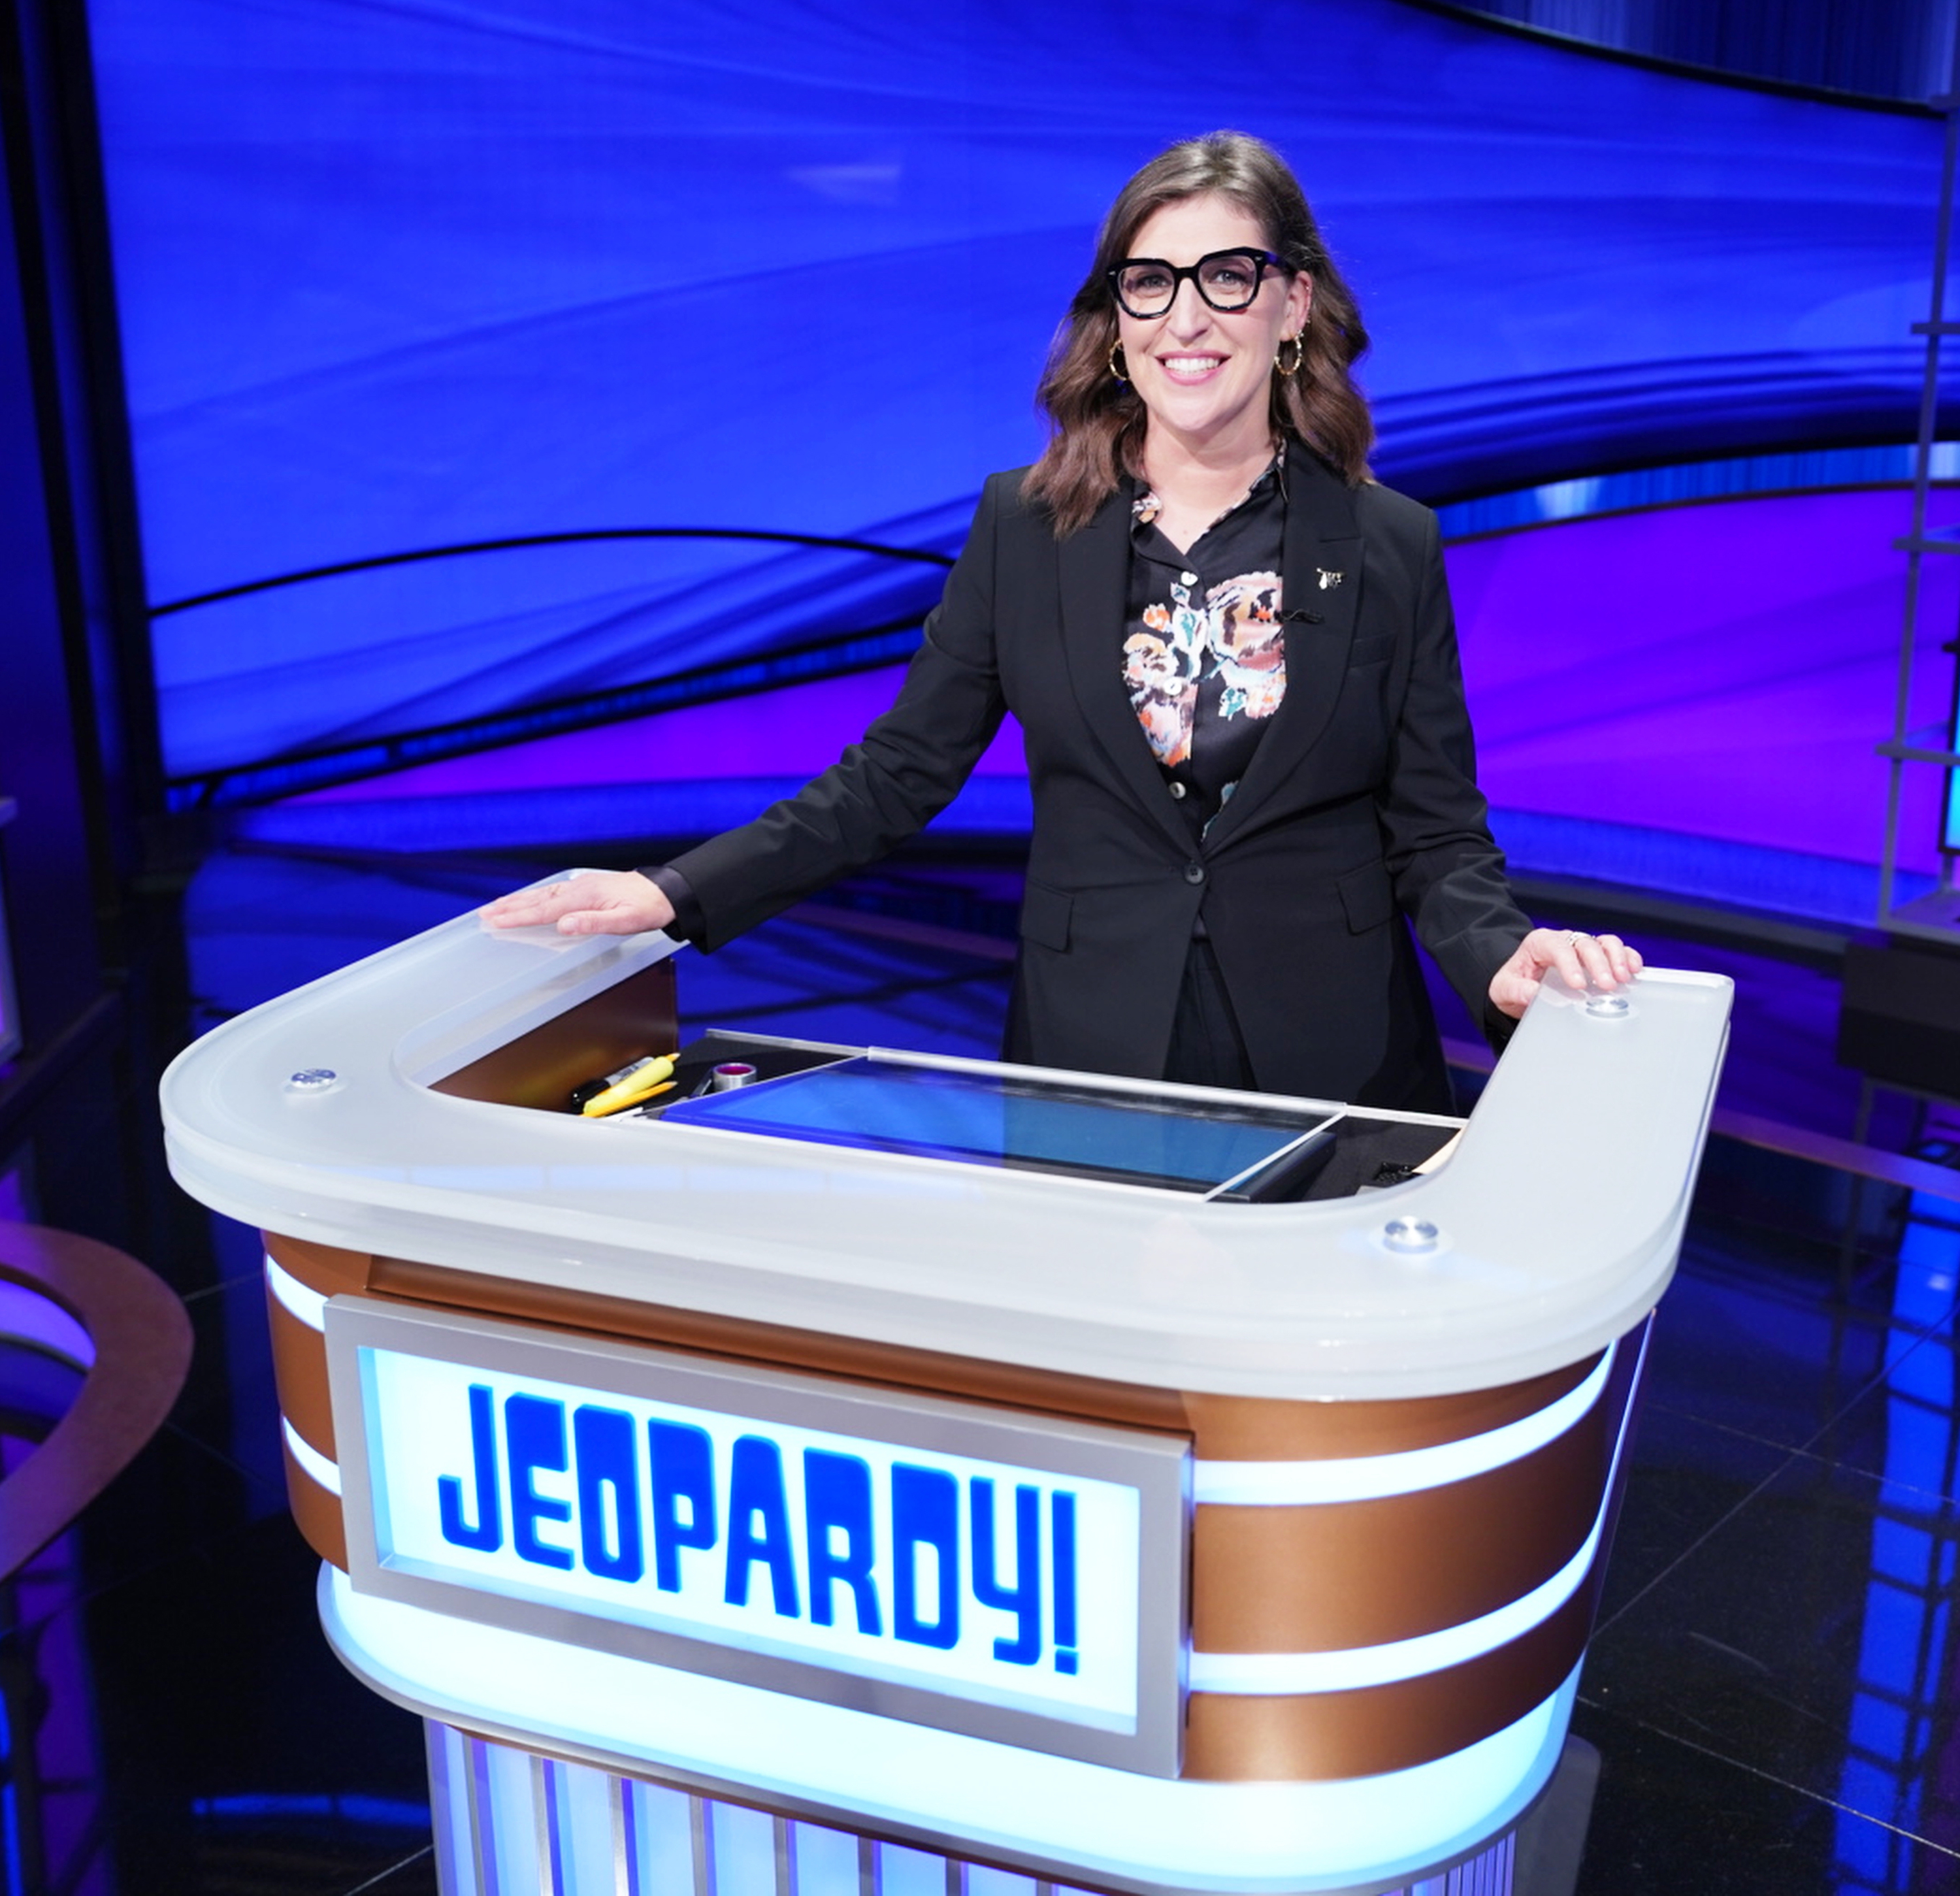 Last Friday, Mayim Bialik was fired from Jeopardy! after being named co-host in 2022